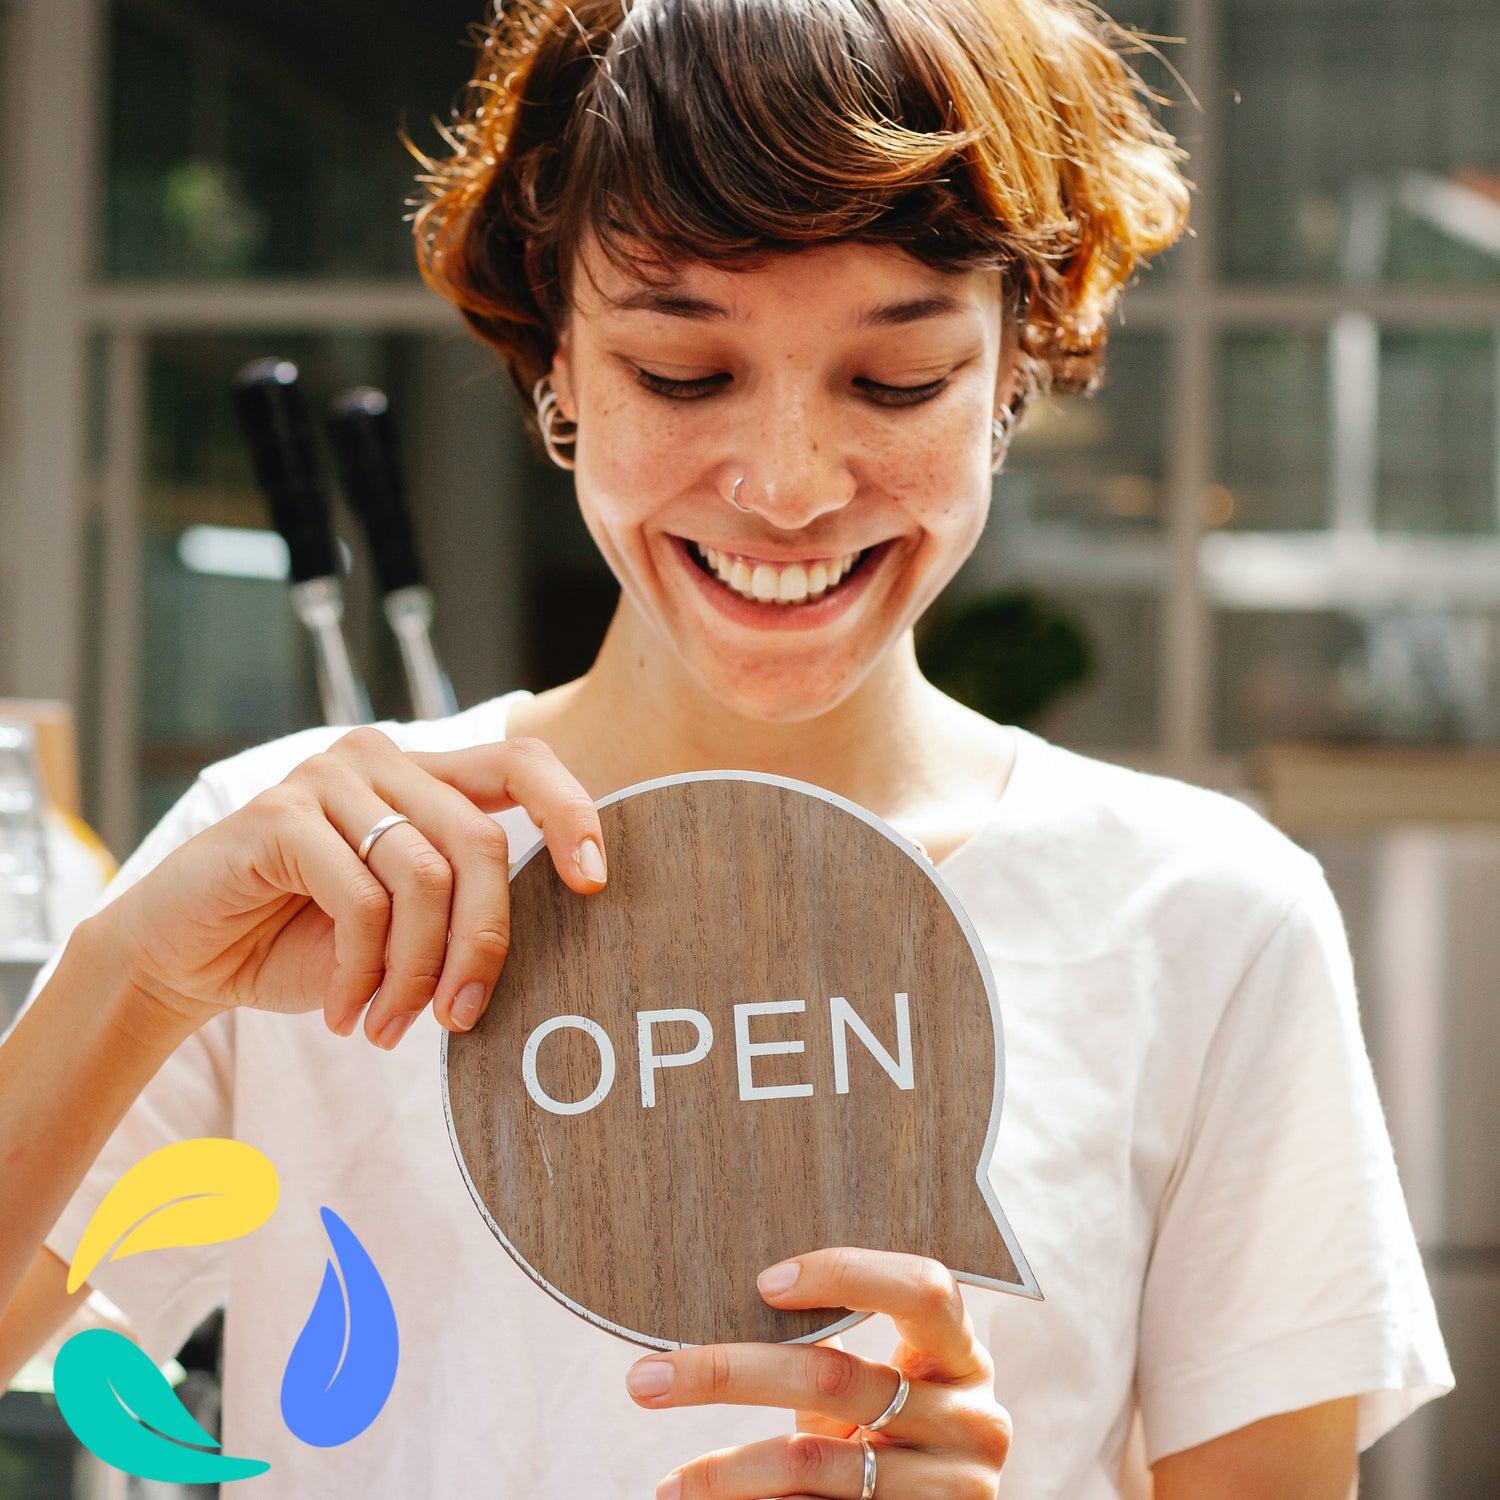 Open your business the right way with eSuite